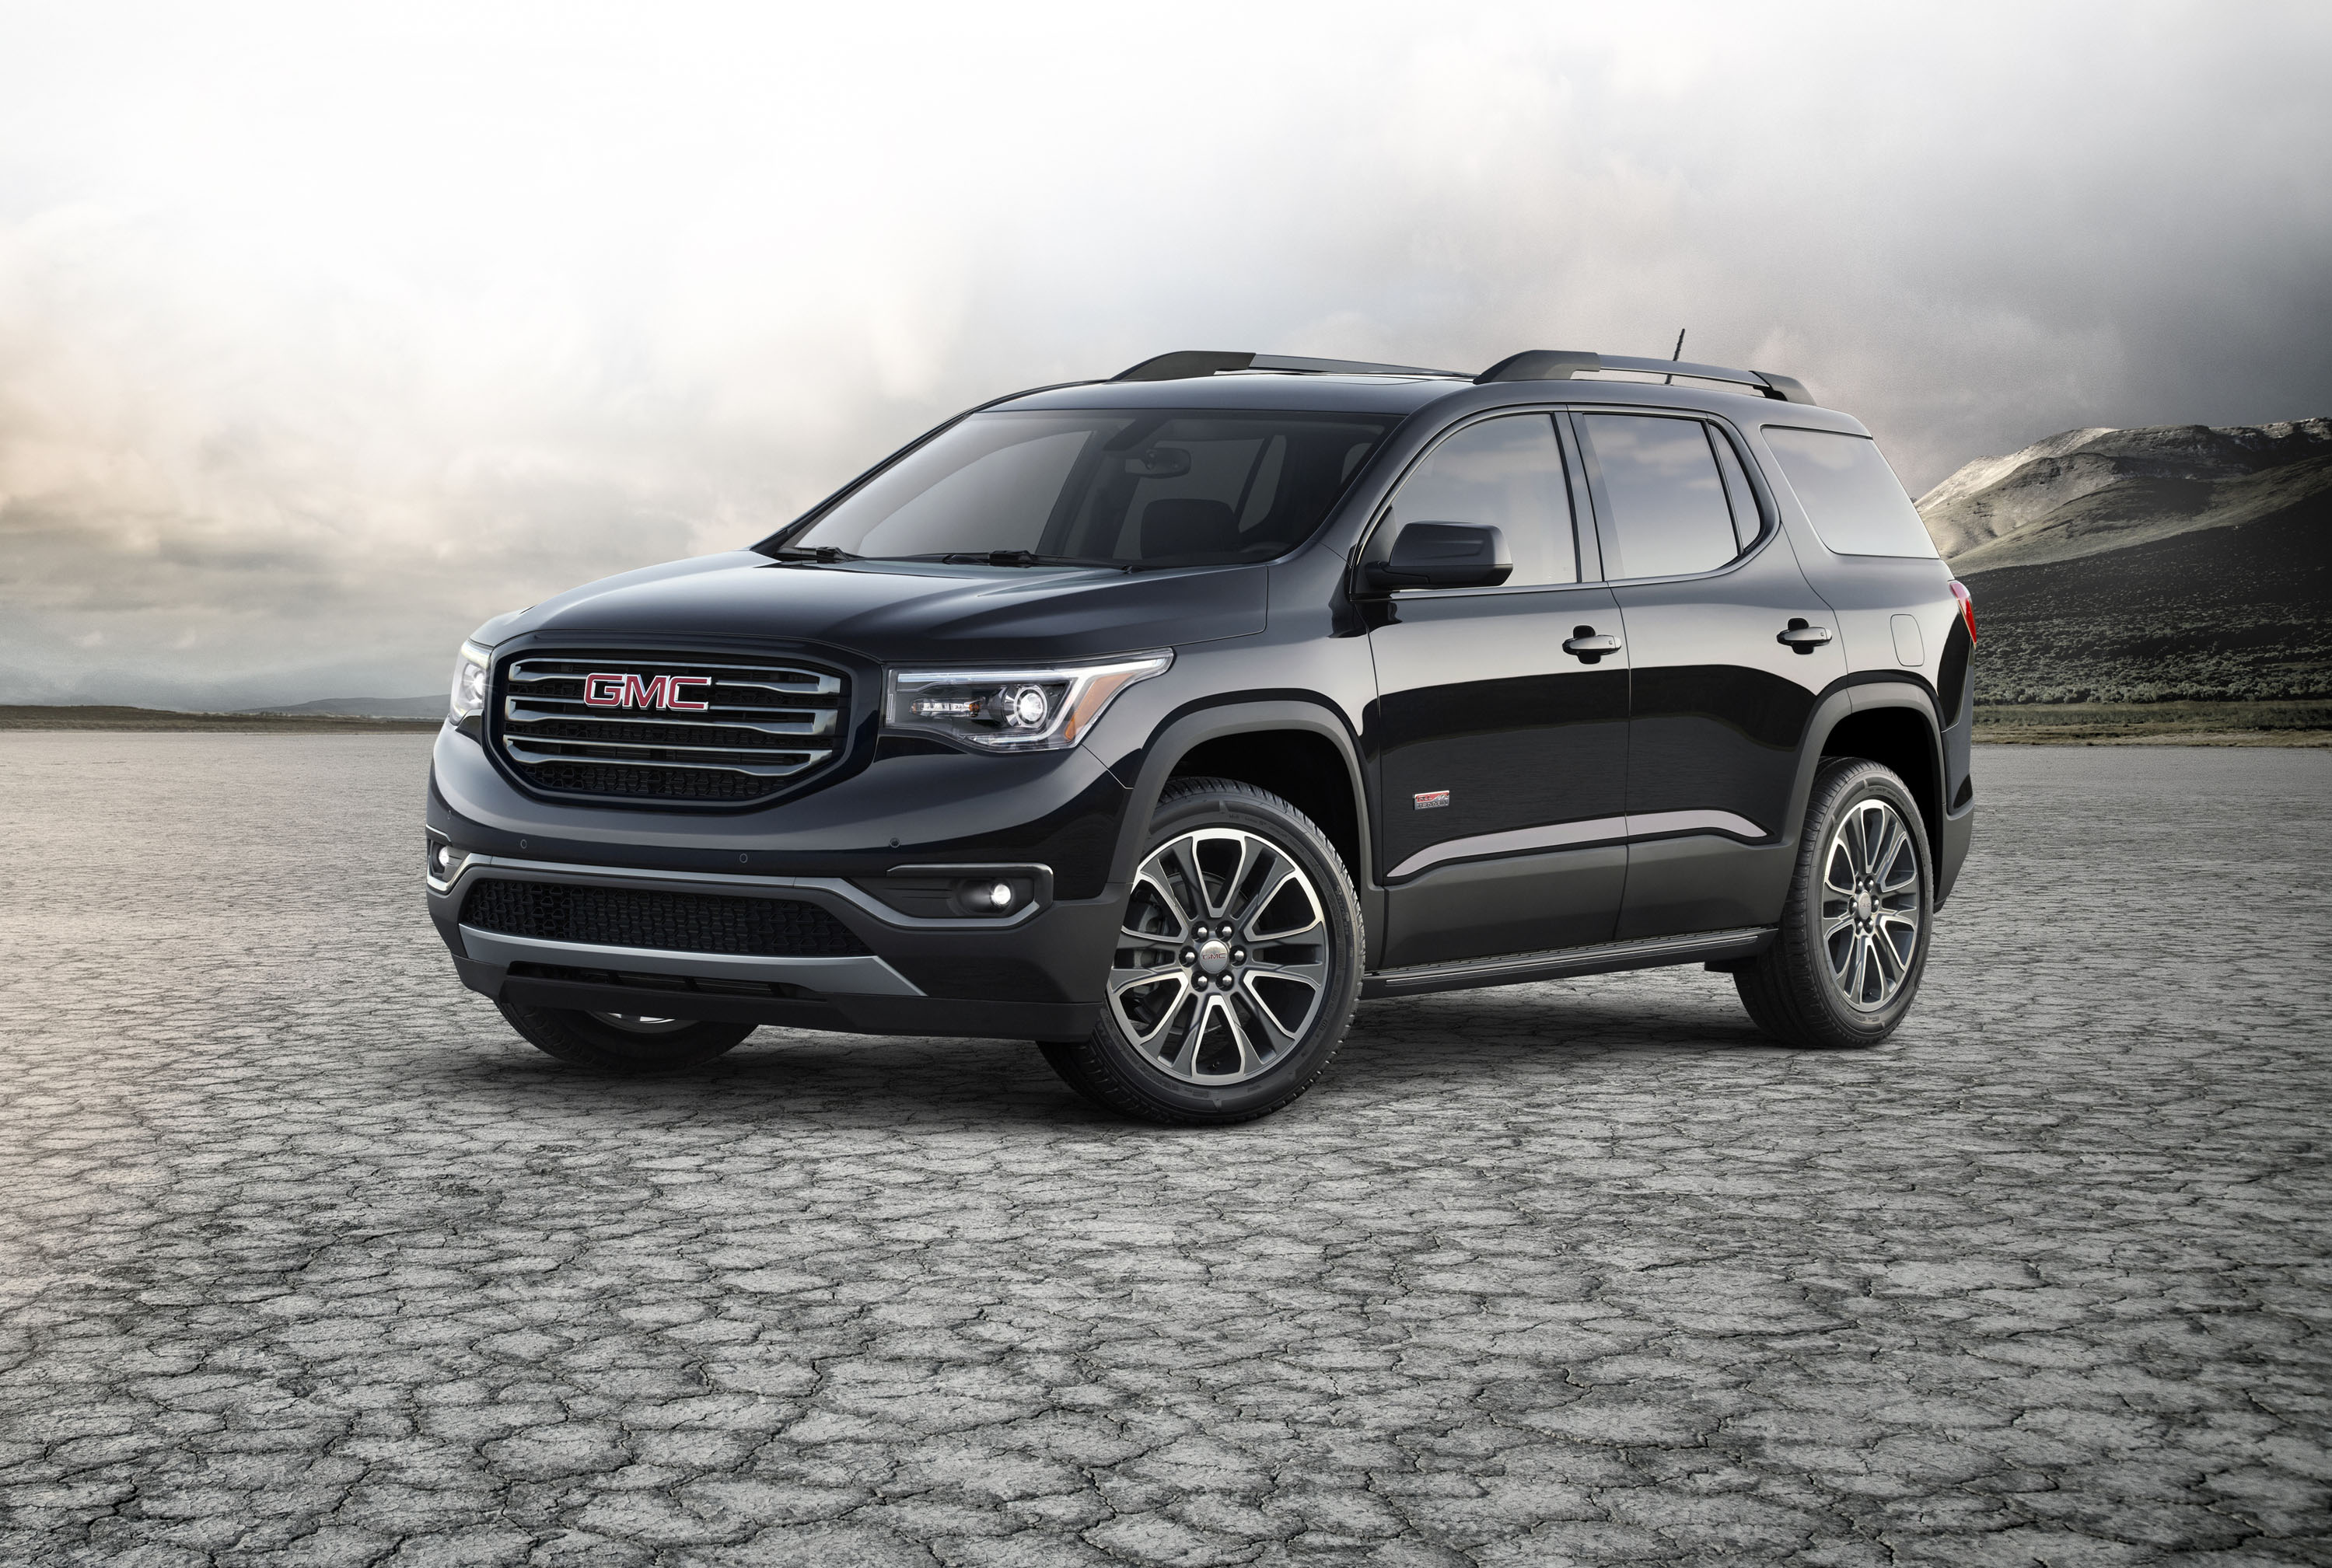 2019 Gmc Acadia Review Ratings Specs Prices And Photos